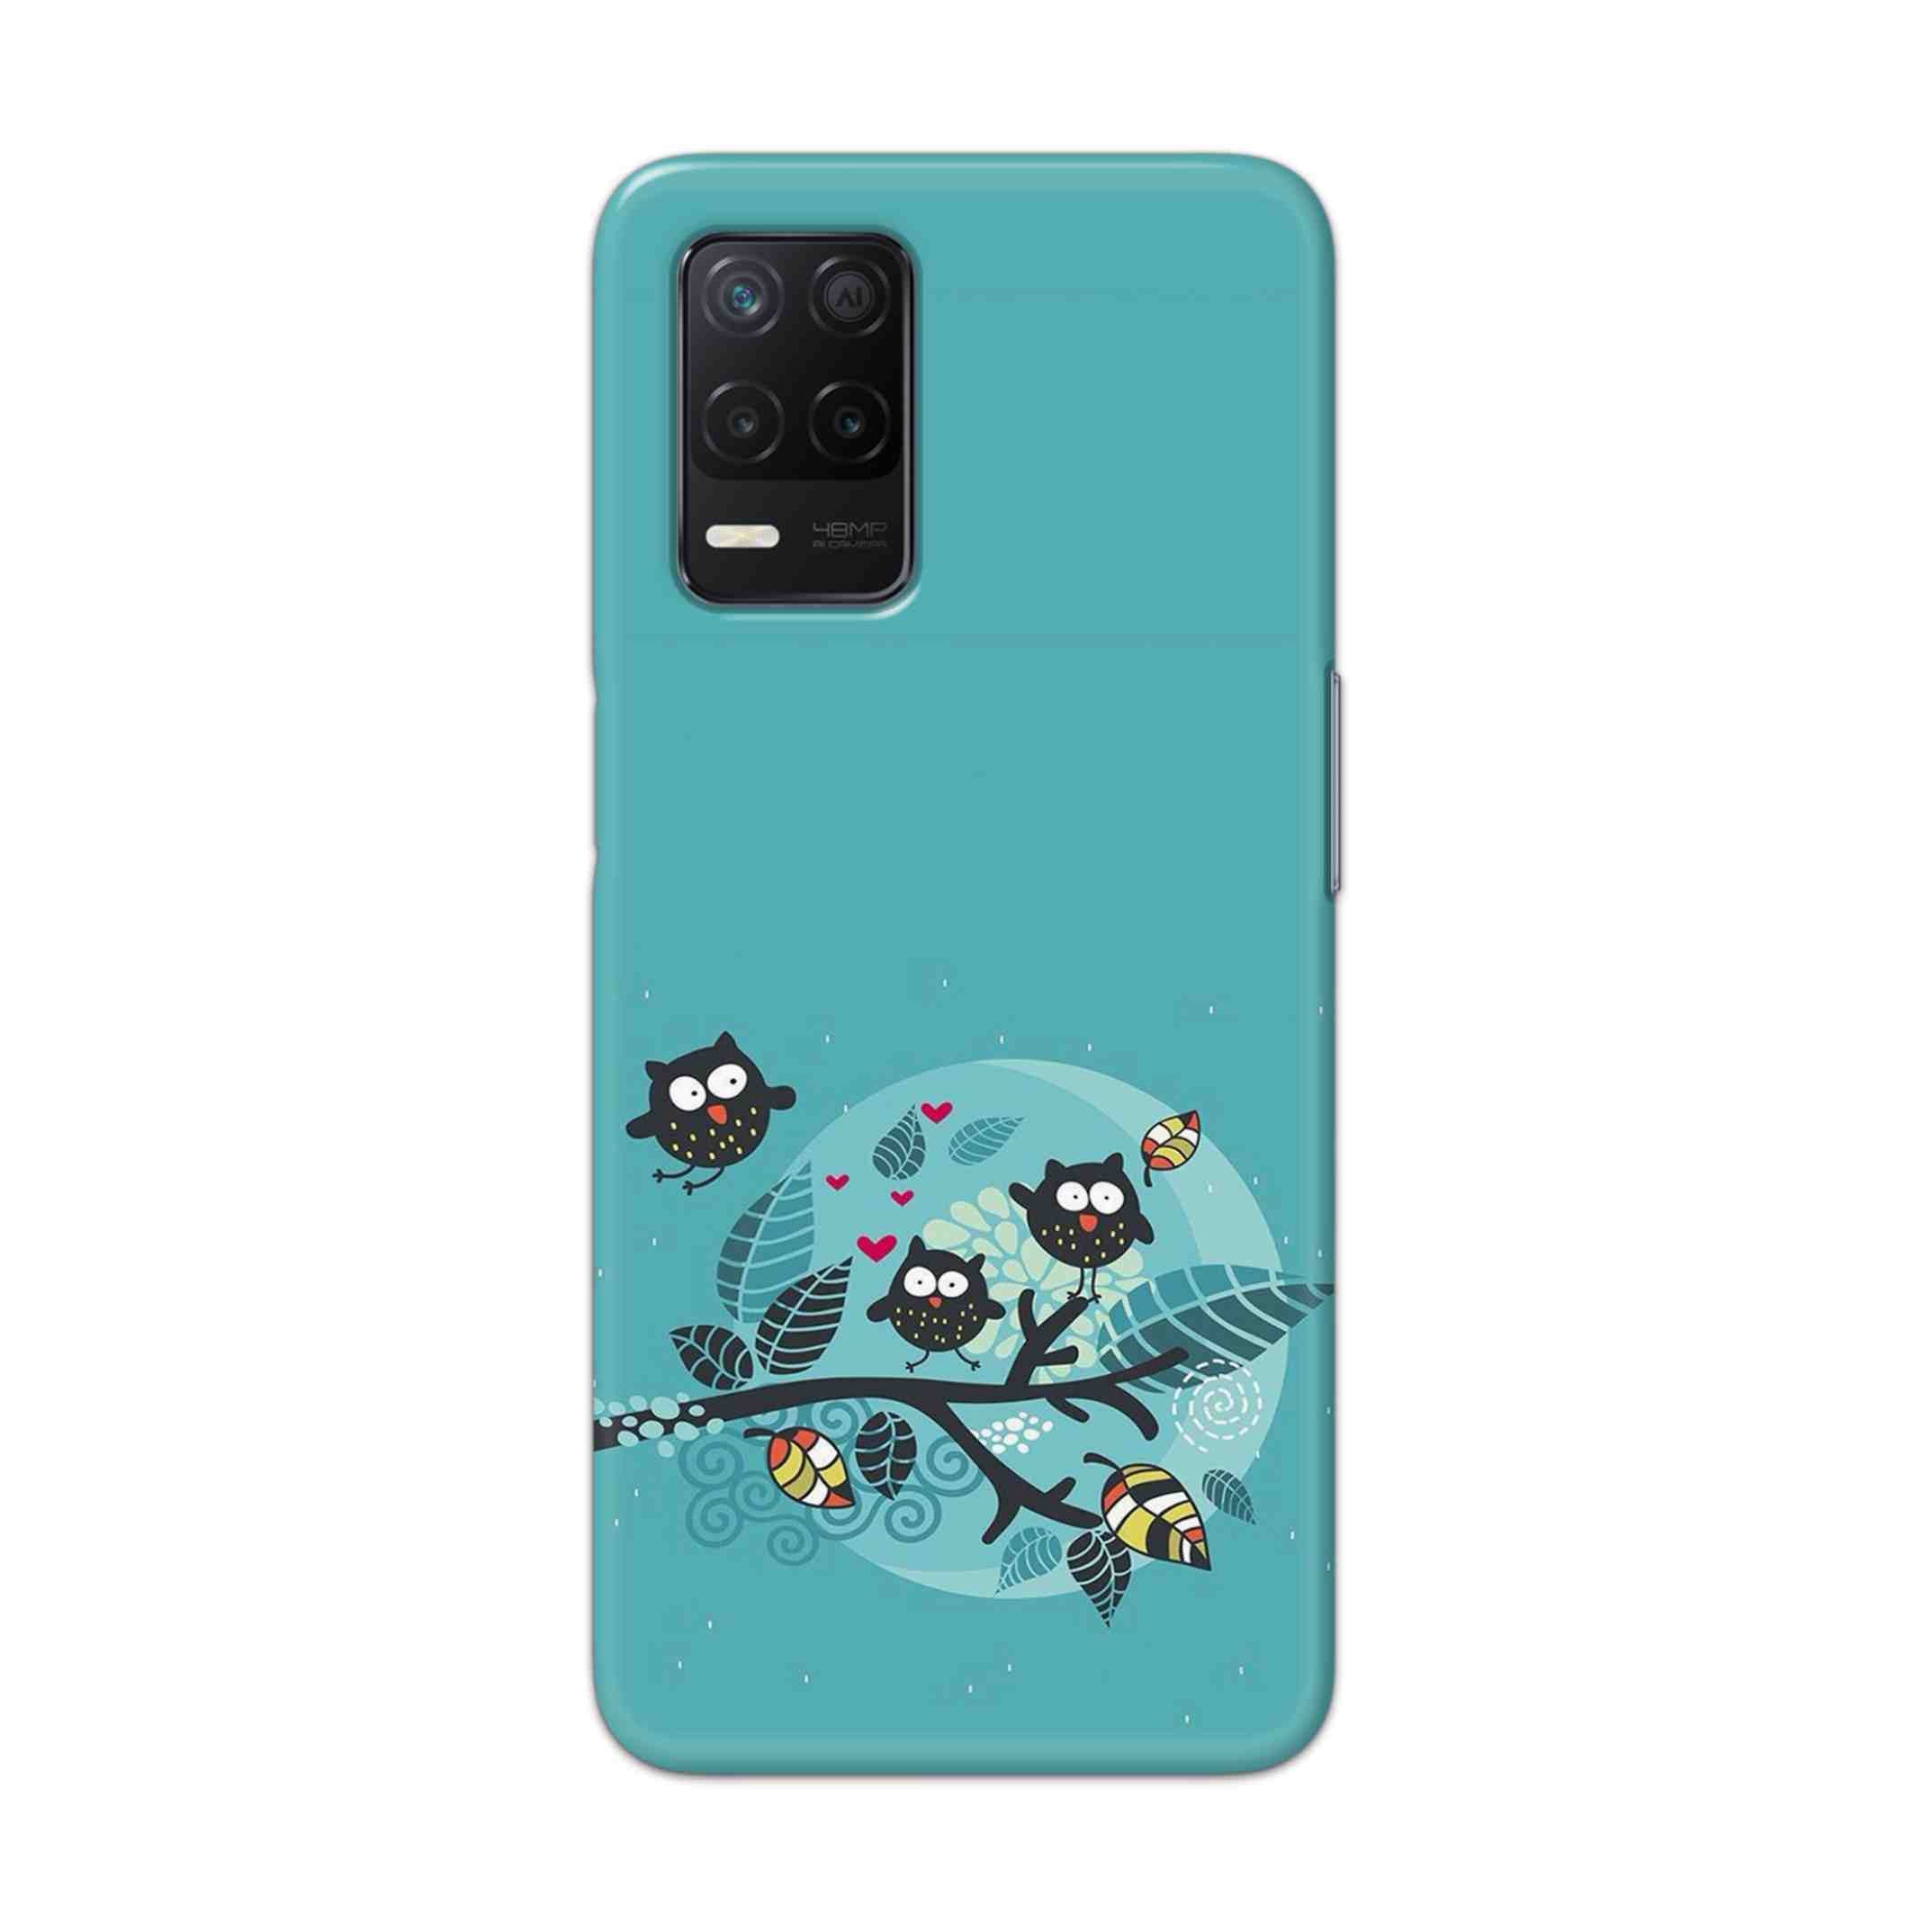 Buy Owl Hard Back Mobile Phone Case Cover For Realme Narzo 30 5G Online